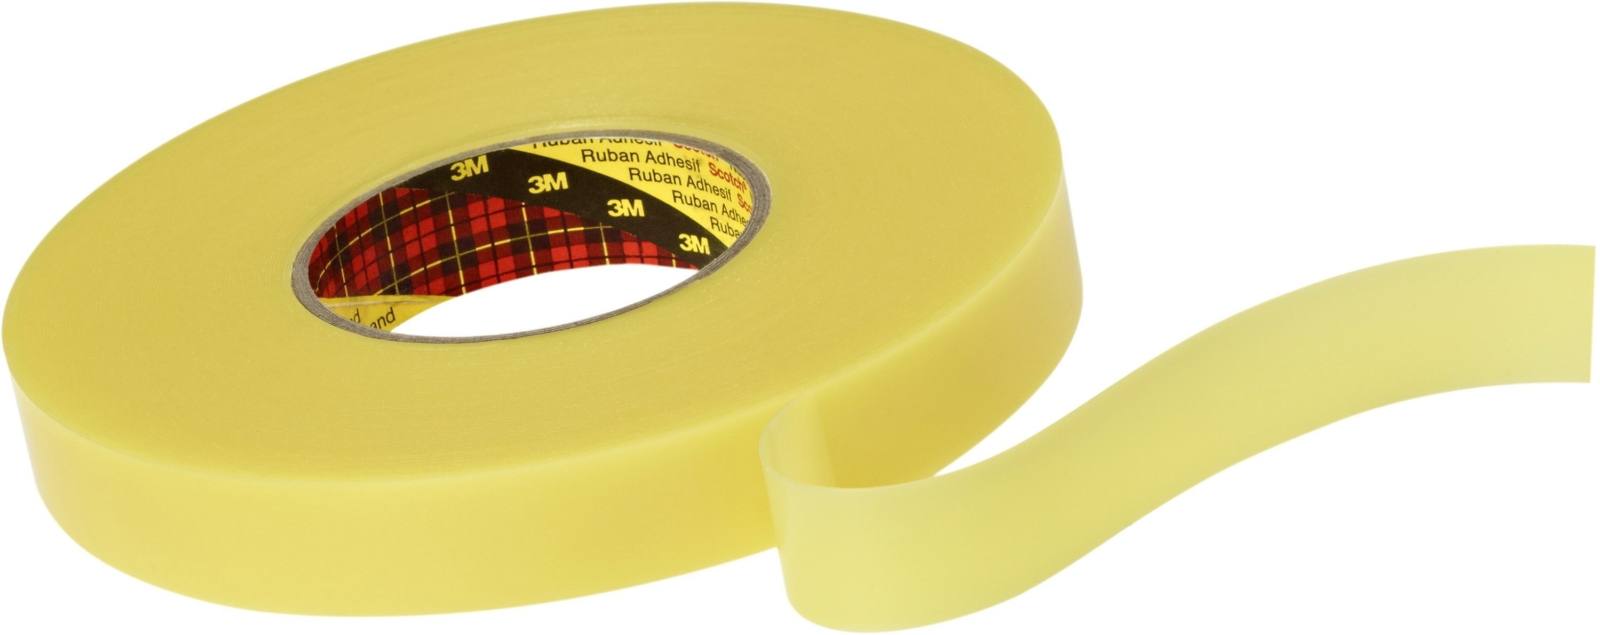 3M Double-sided removable adhesive tape 4656F, yellow, 6 mm x 33 m, 0.6 mm